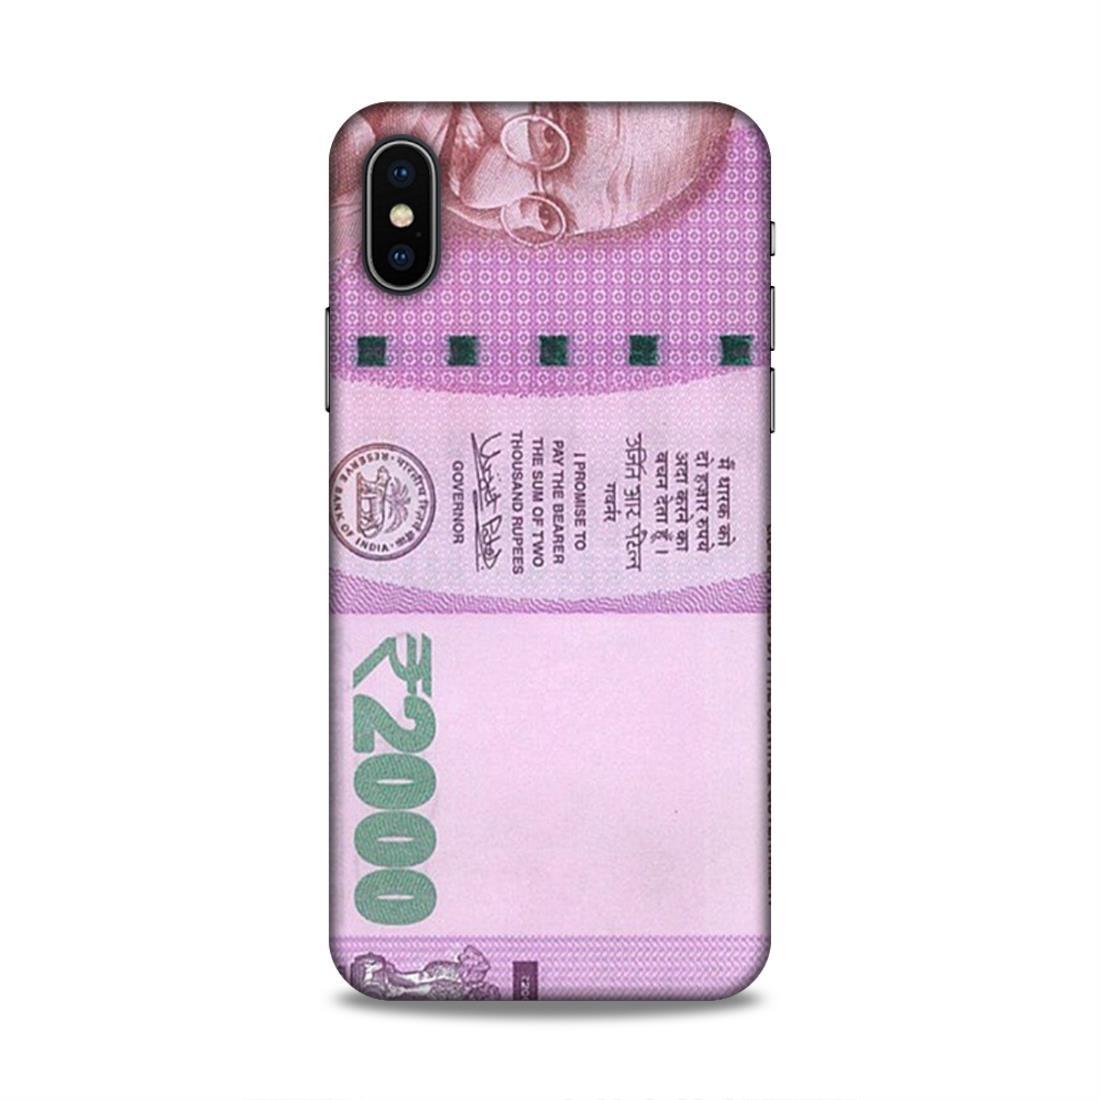 Rs 2000 Currency Note iPhone X Phone Cover